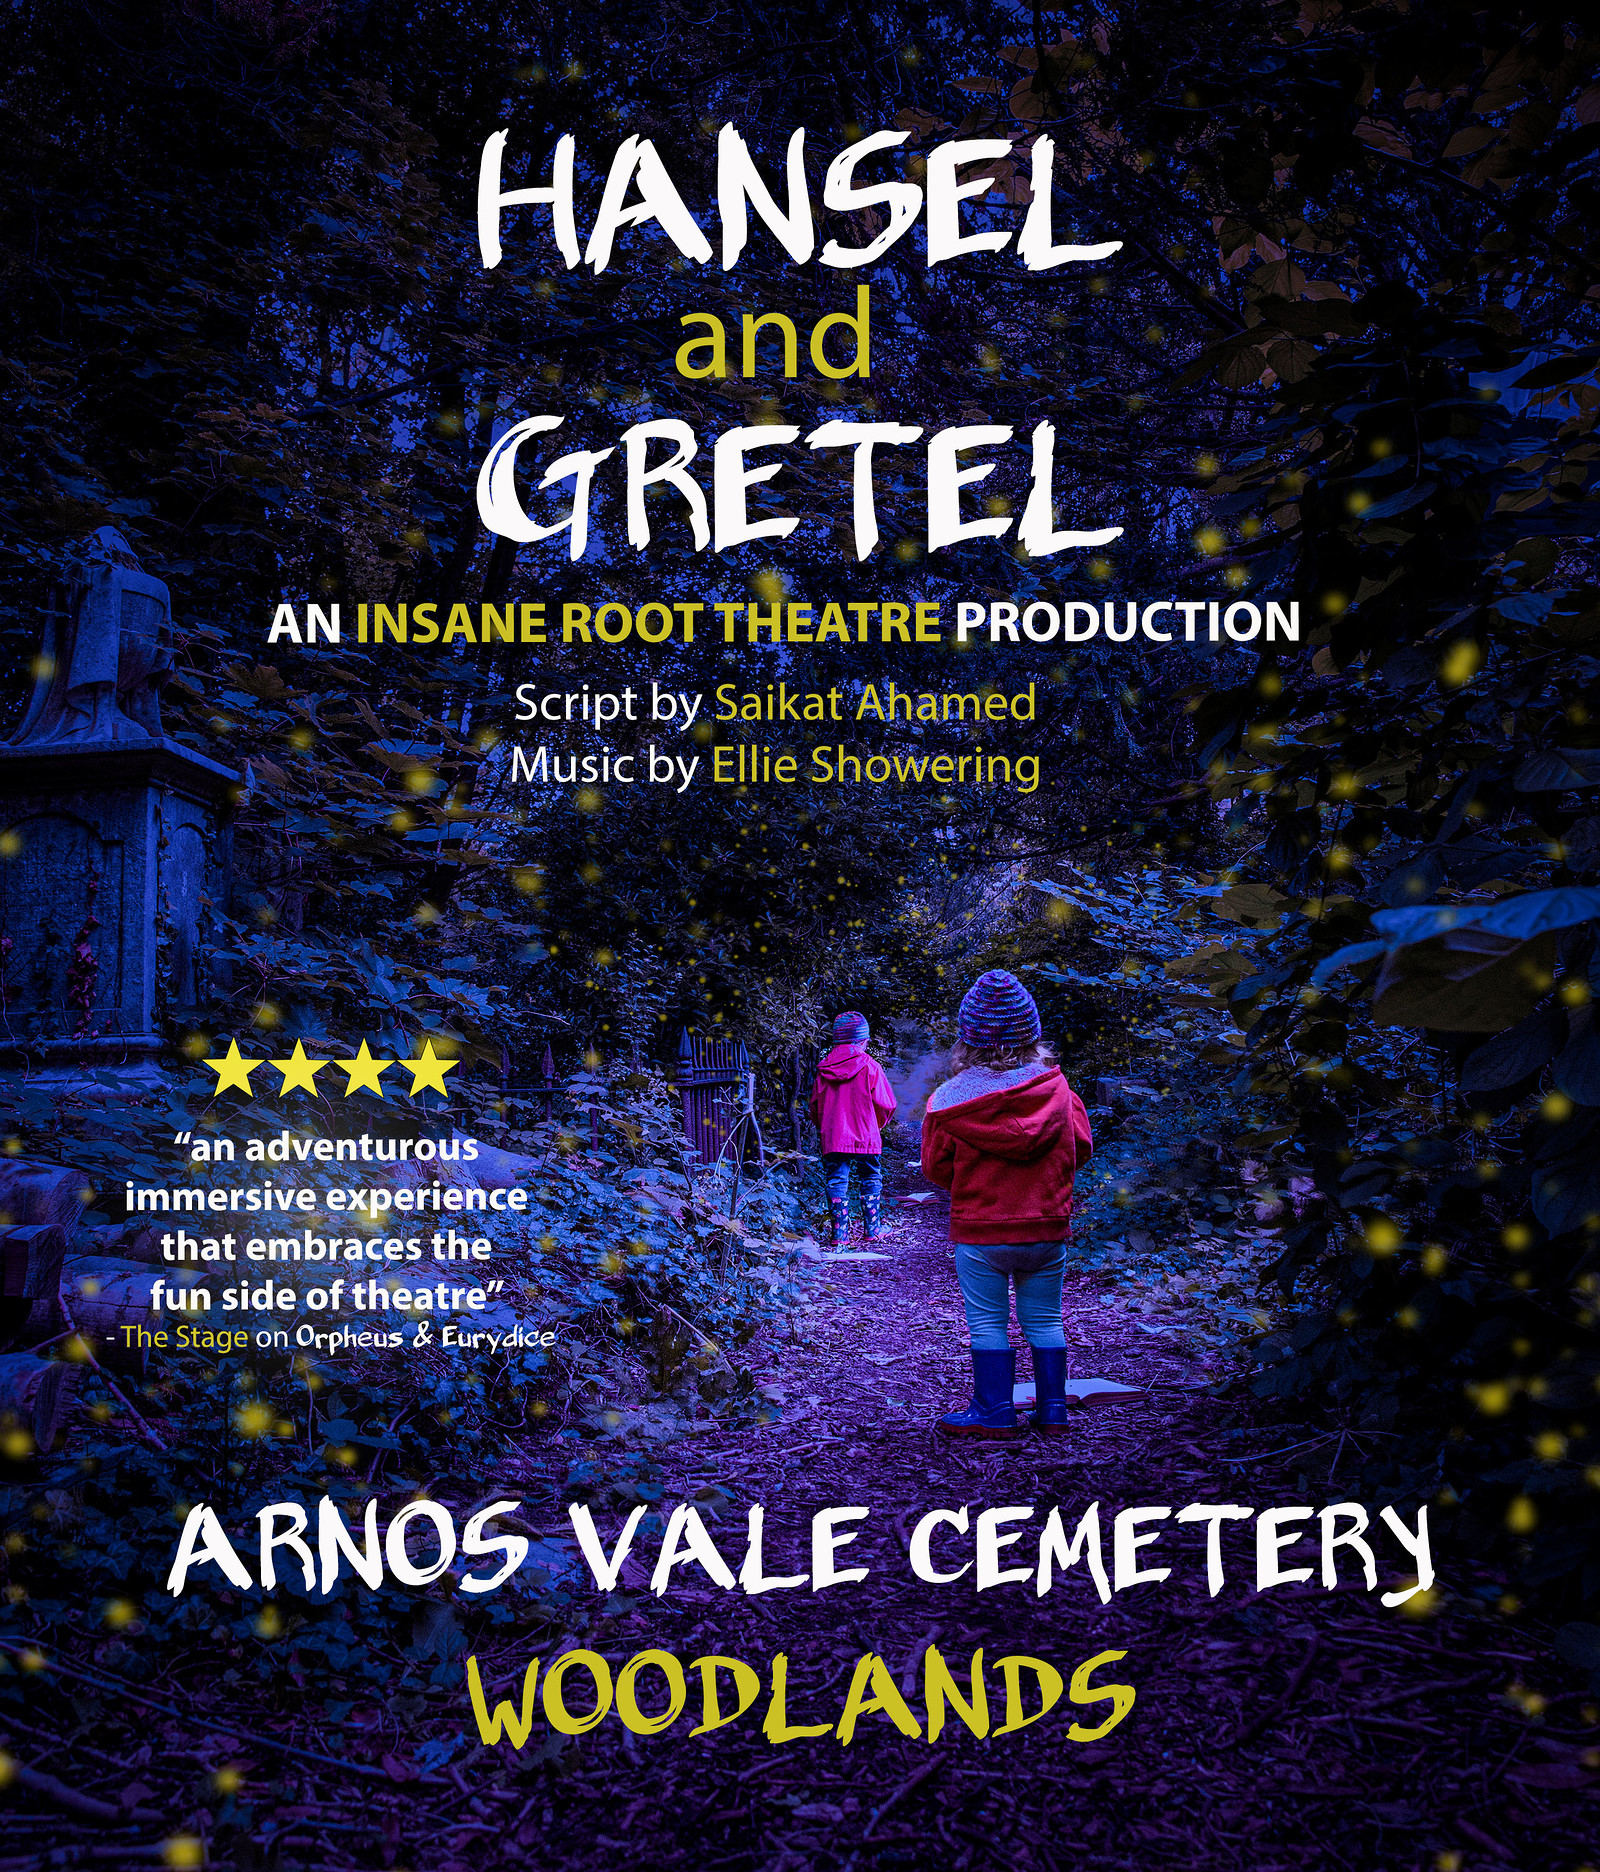 Hansel and Gretel at Arnos Vale Cemetery Woodlands